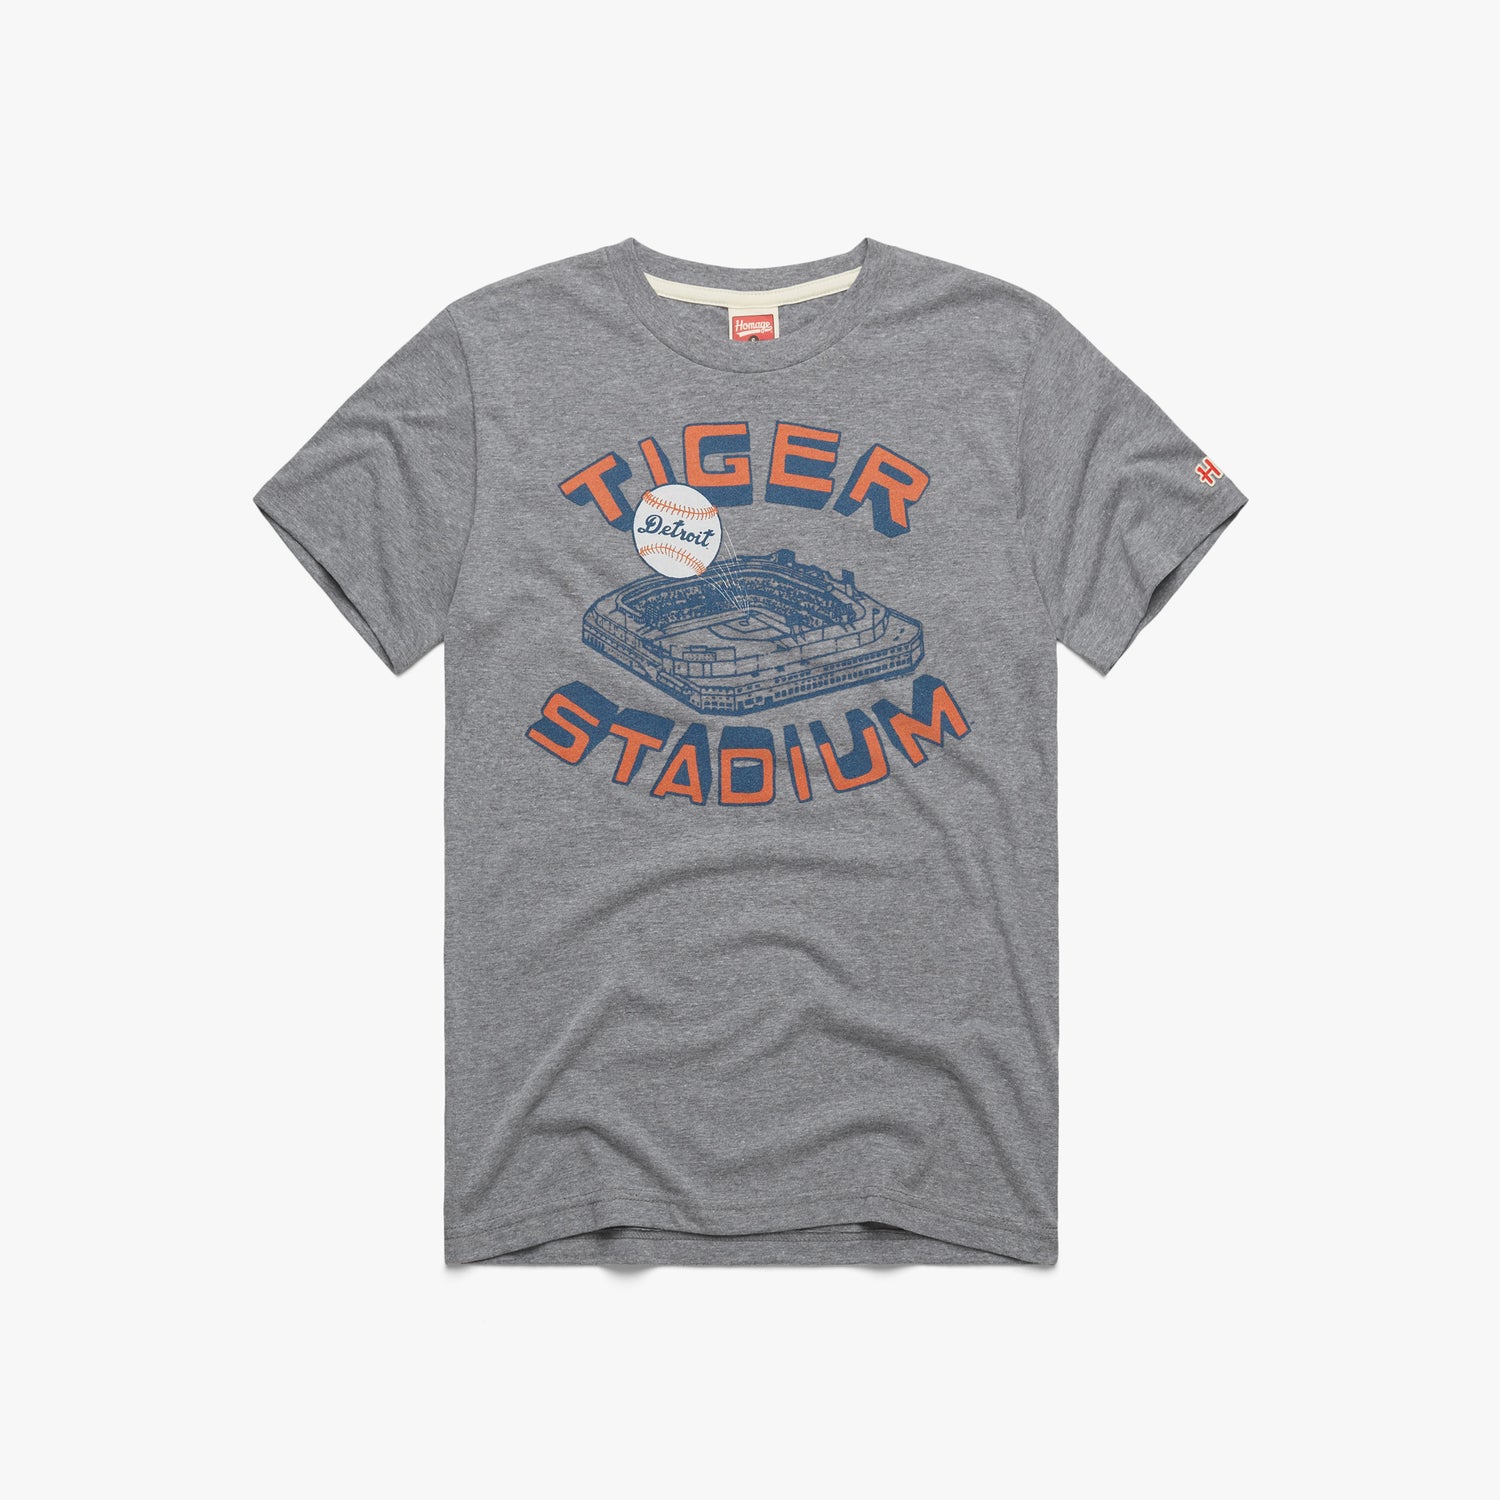 Detroit Tiger Stadium T-Shirt from Homage. | Navy | Vintage Apparel from Homage.